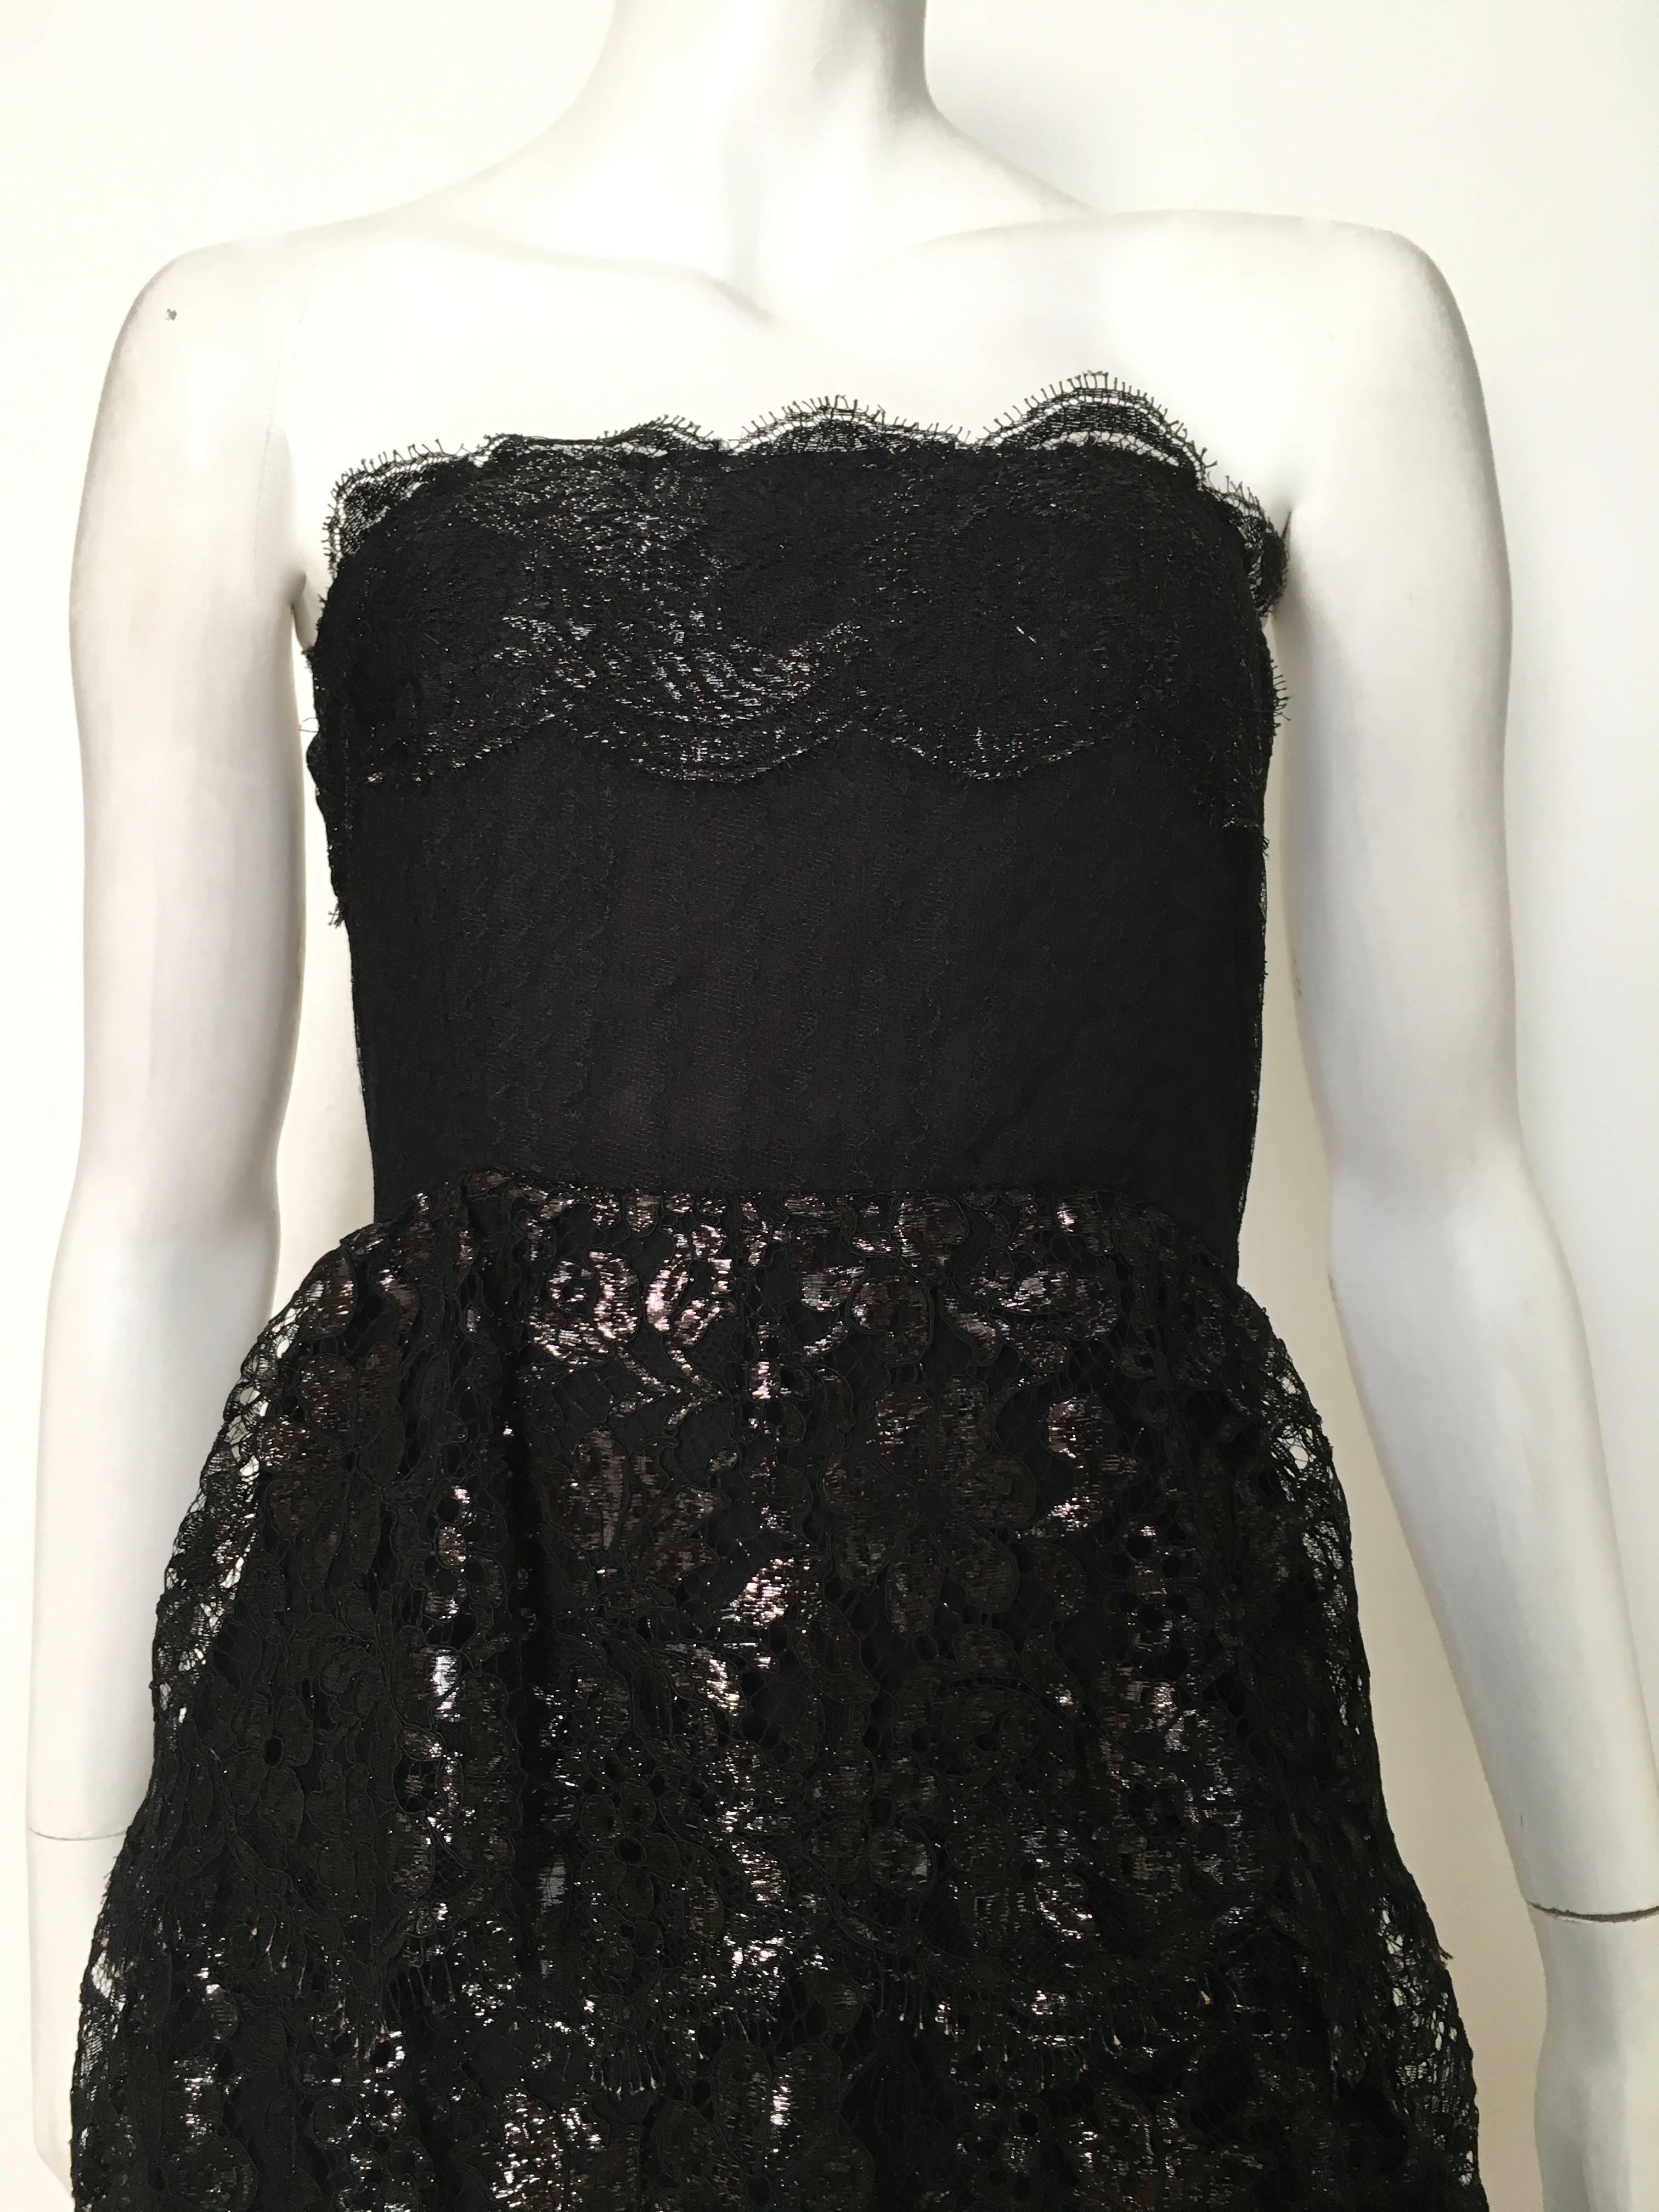 Pamela Dennis 1990s black strapless layered lace evening cocktail dress is a size 4.  Ladies please grab your tape measure so you can measure your bust, waist & hips to make certain this gorgeous dress will fit your lovely body. Want to make an